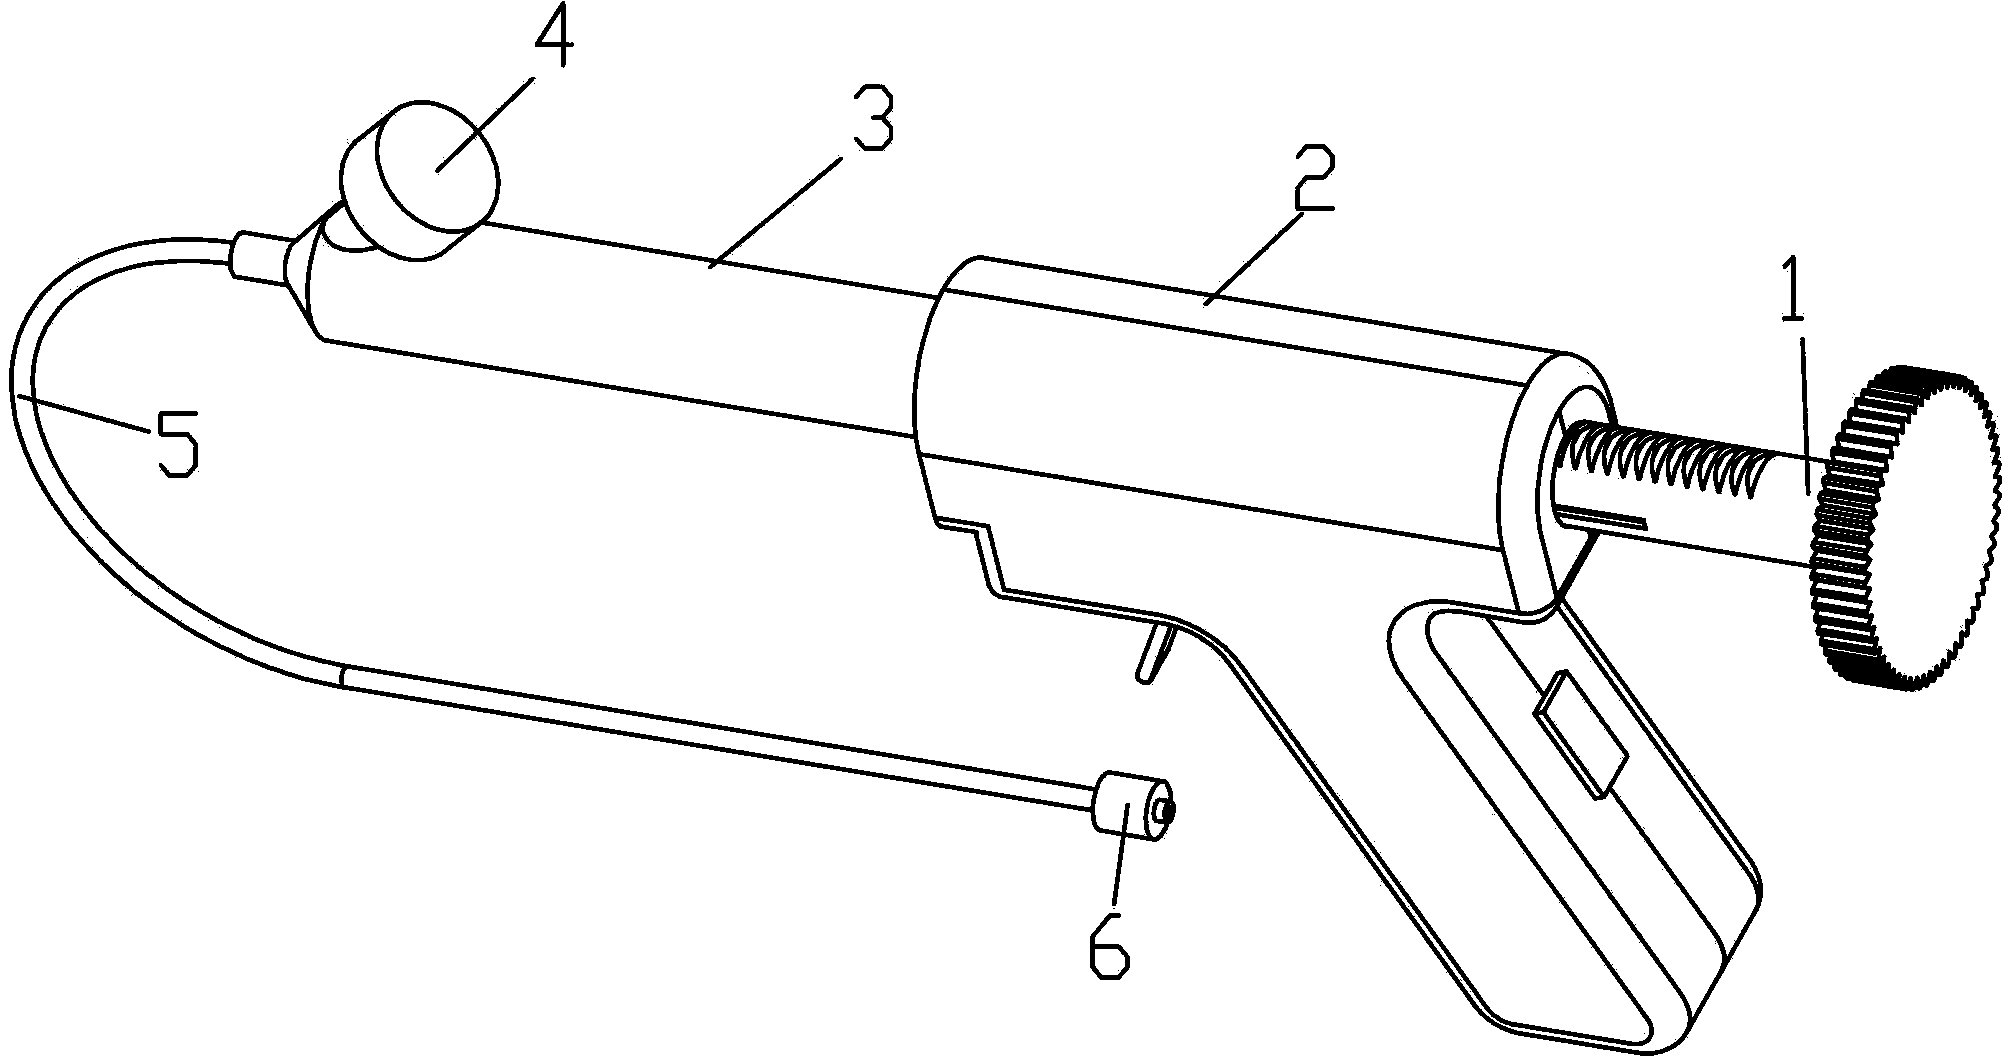 Novel balloon dilatation pressure device capable of being operated by one hand